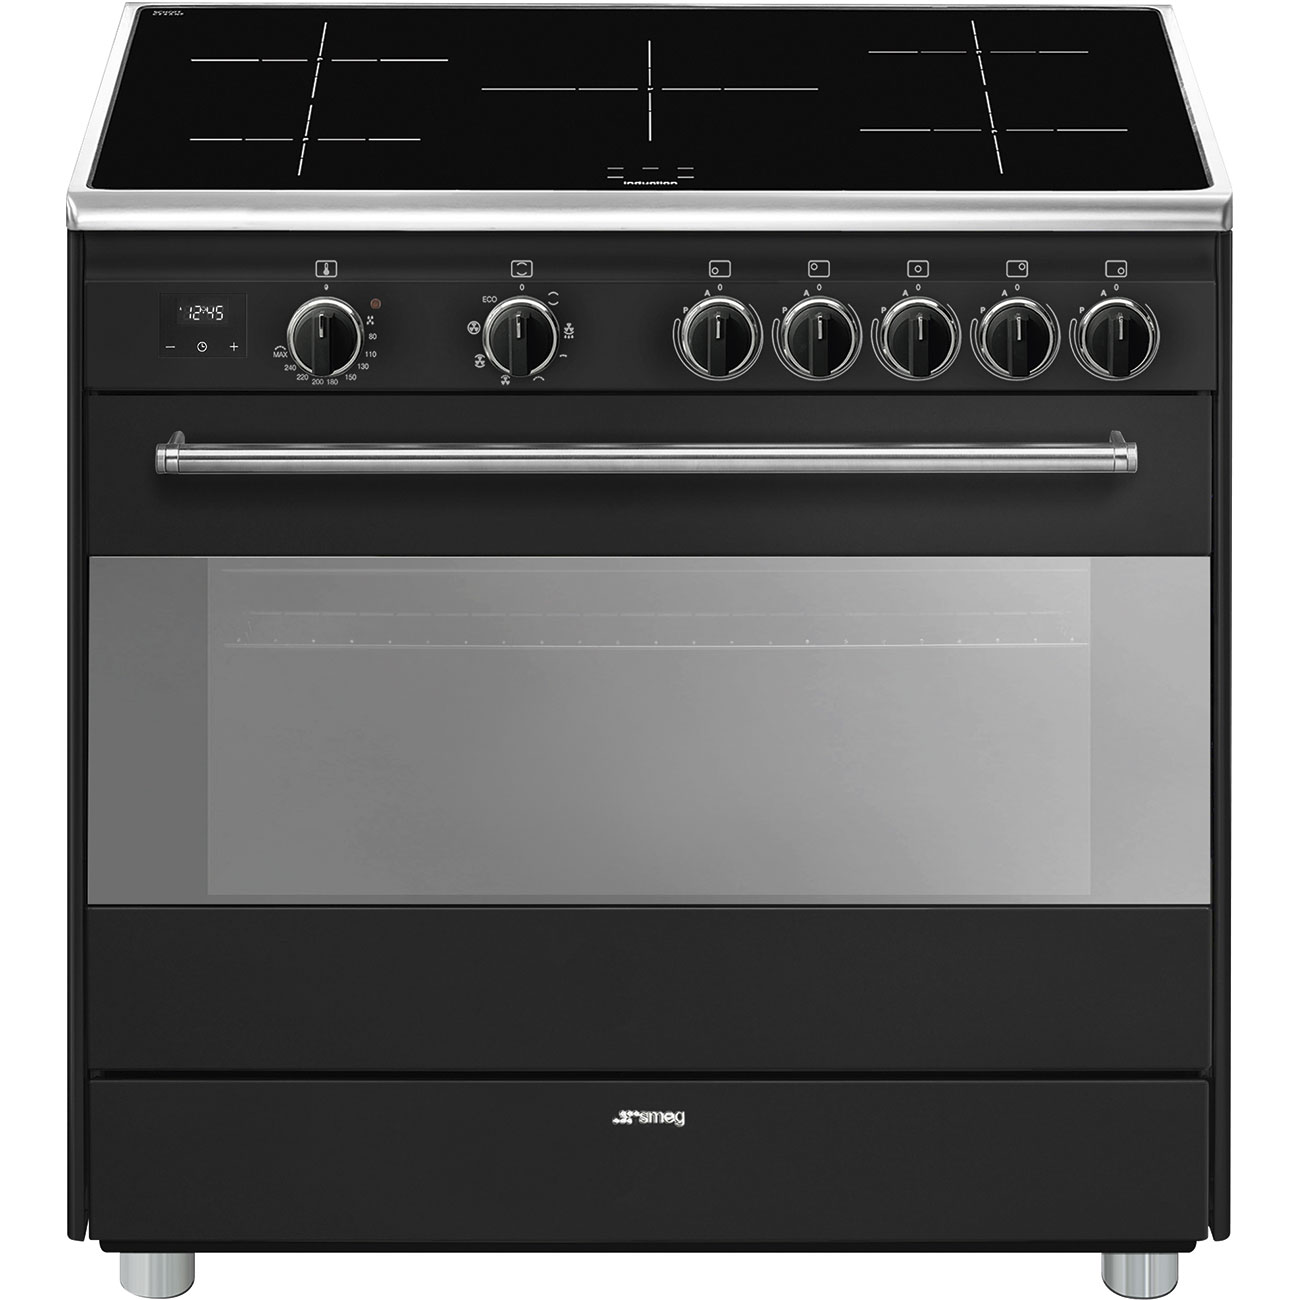 Smeg Anthracite Cooker with Induction Hob_1